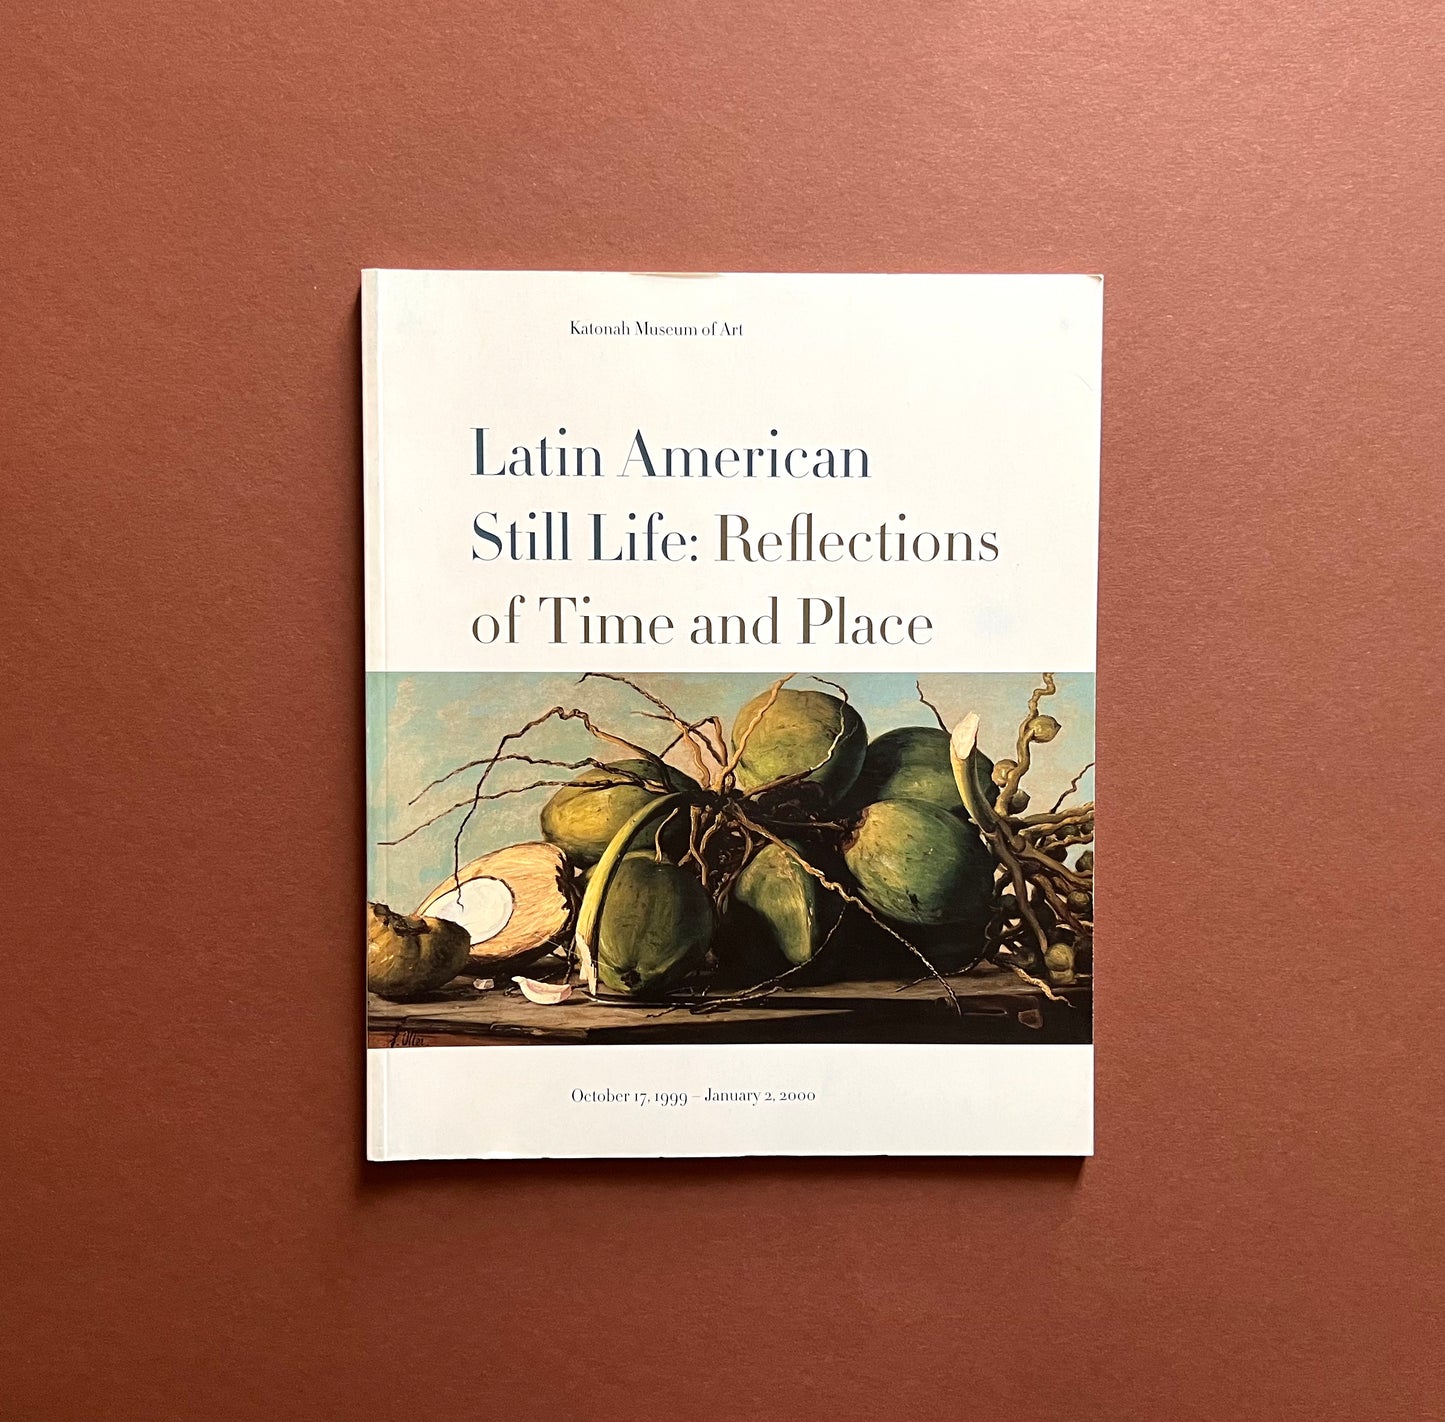 Latin American Still Life: Reflections of Time and Place